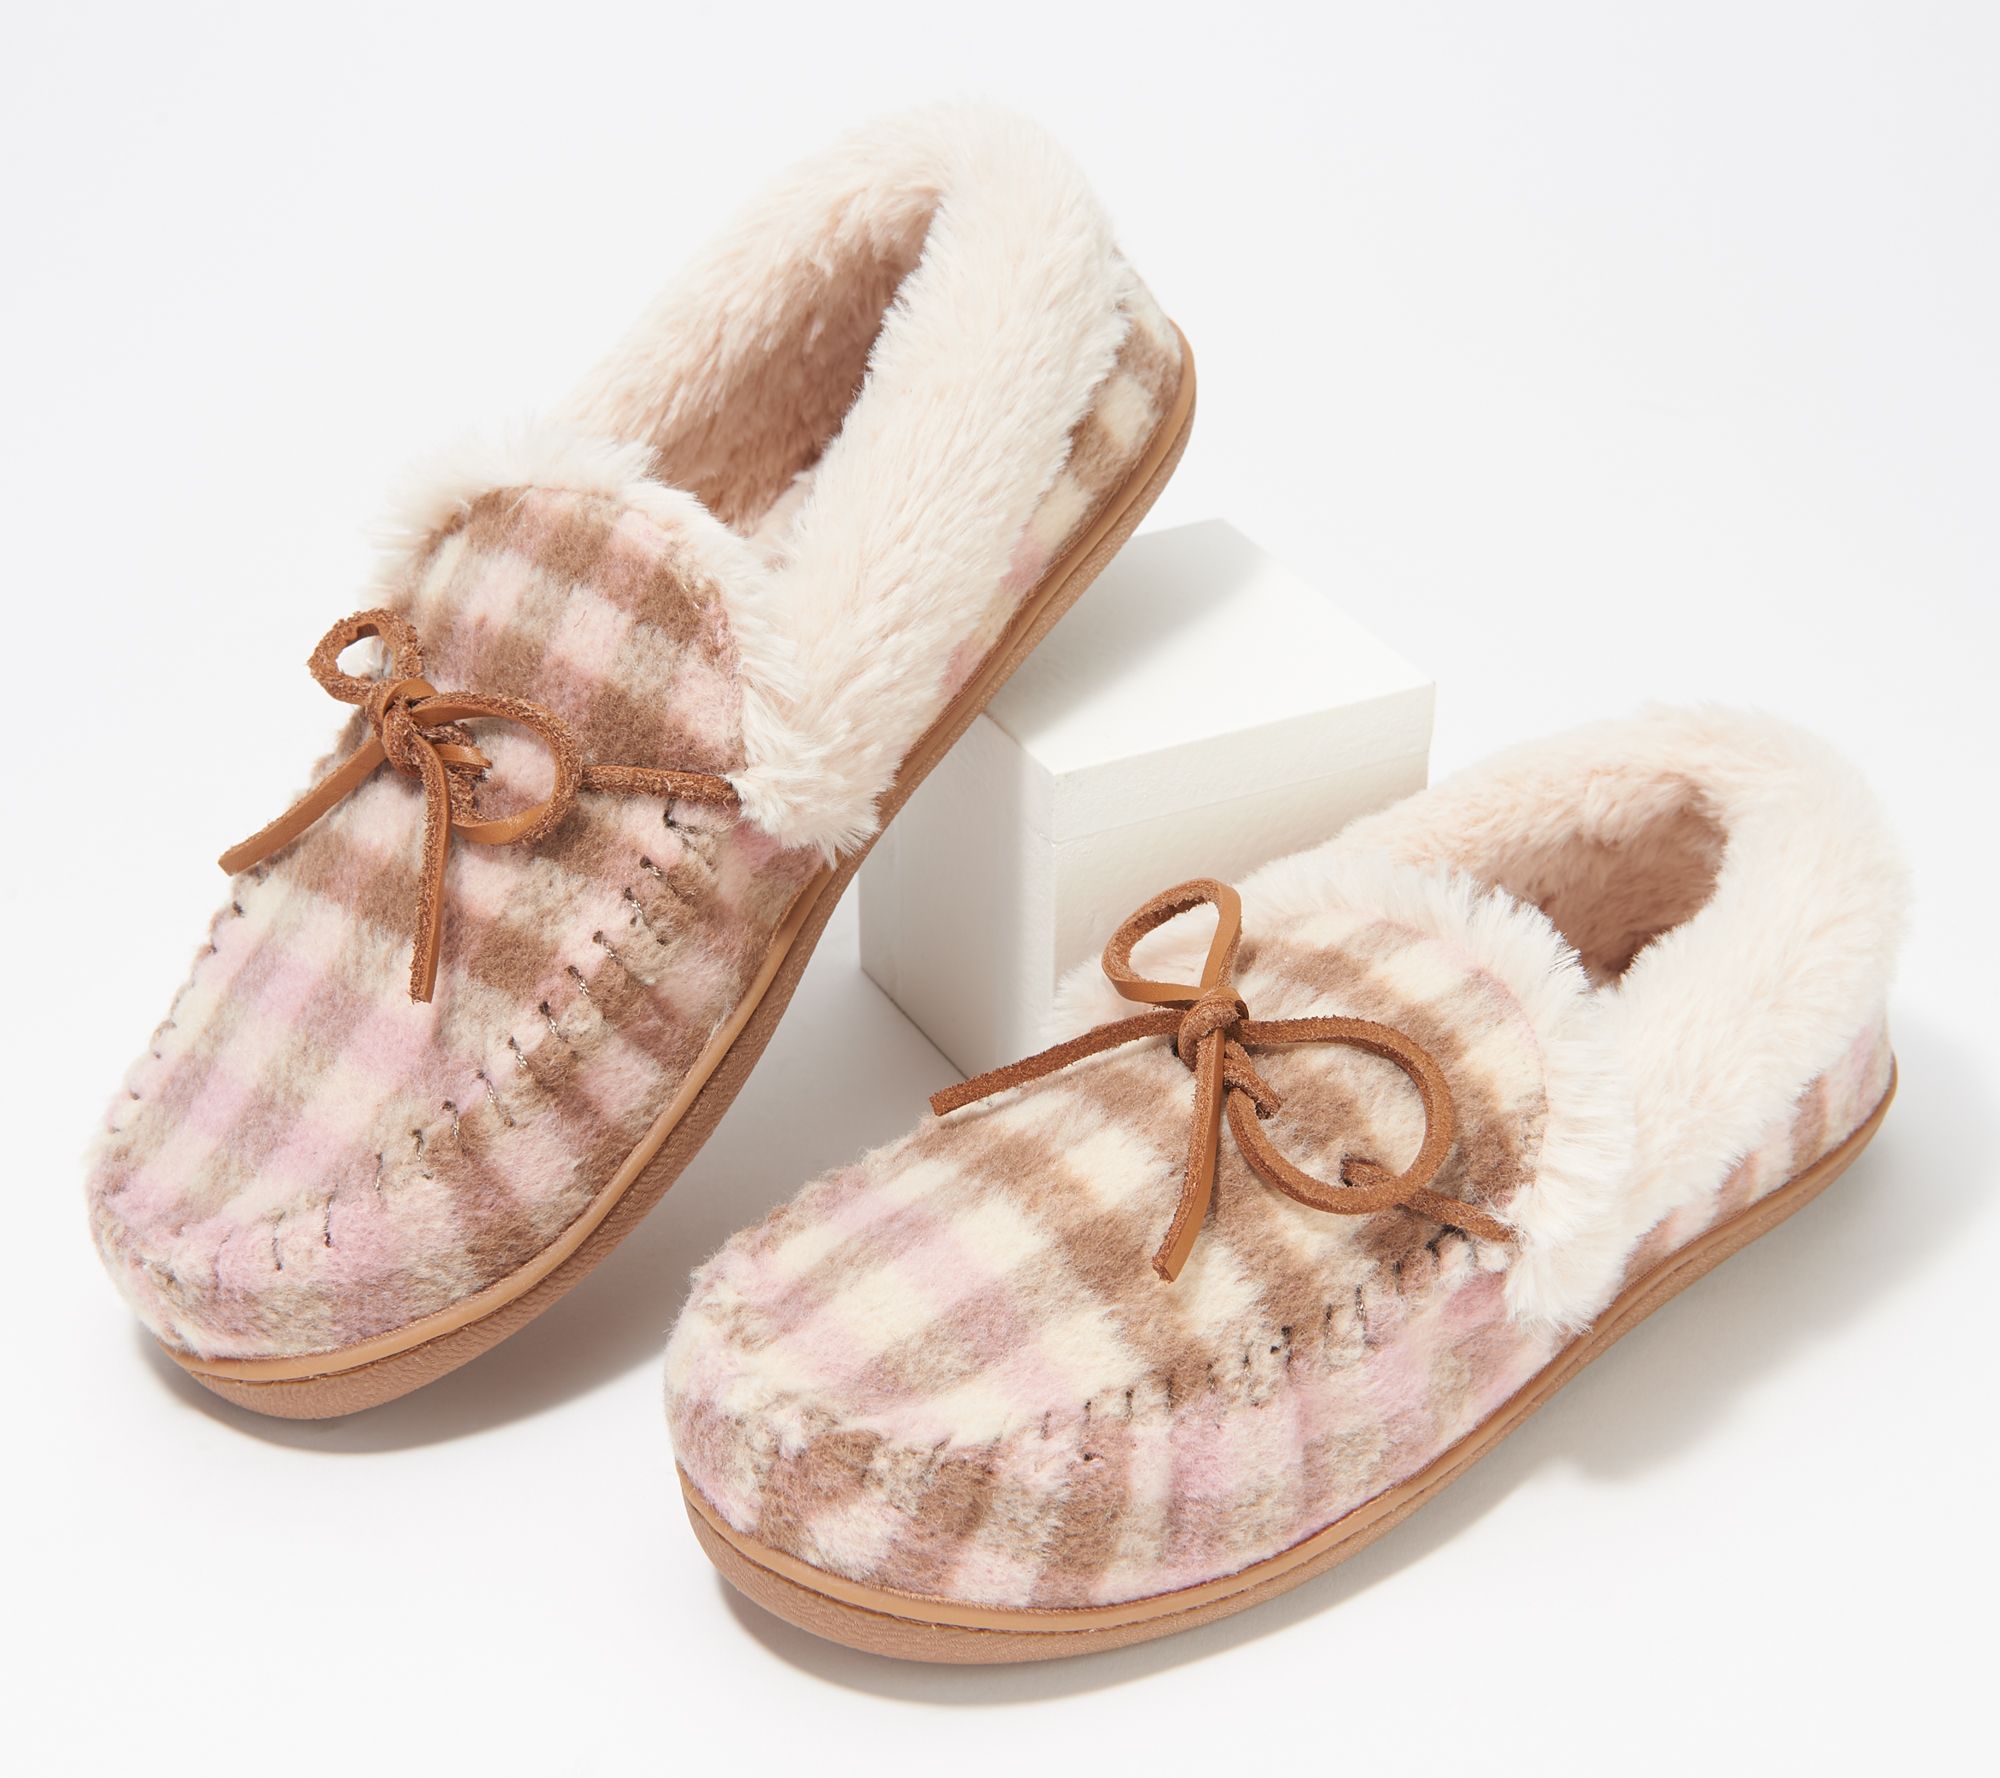 clarks slippers qvc